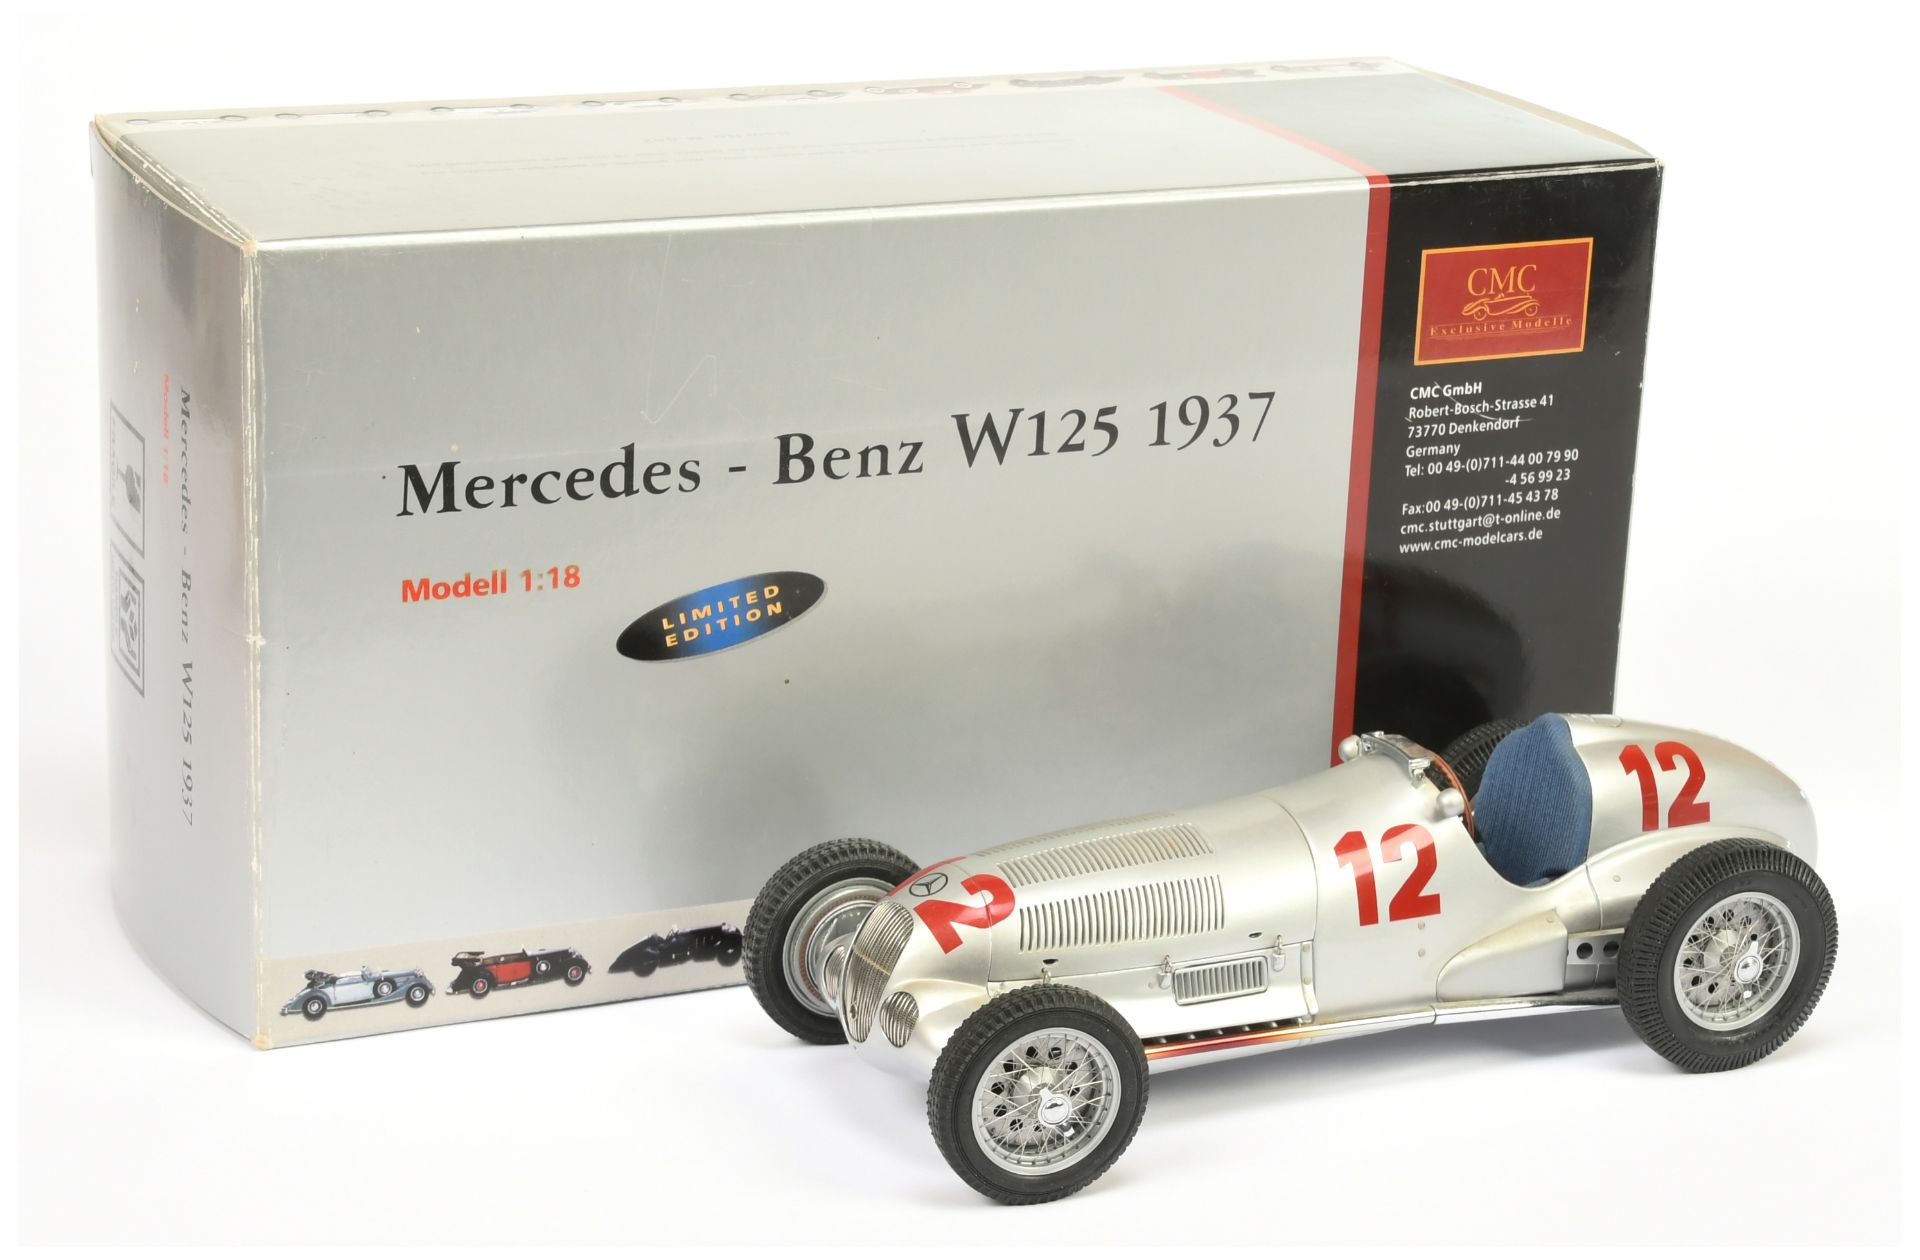 CMC 1/18th scale M-052 Mercedes Benz W125 1937 - silver, blue interior, racing number 12 Excellen...